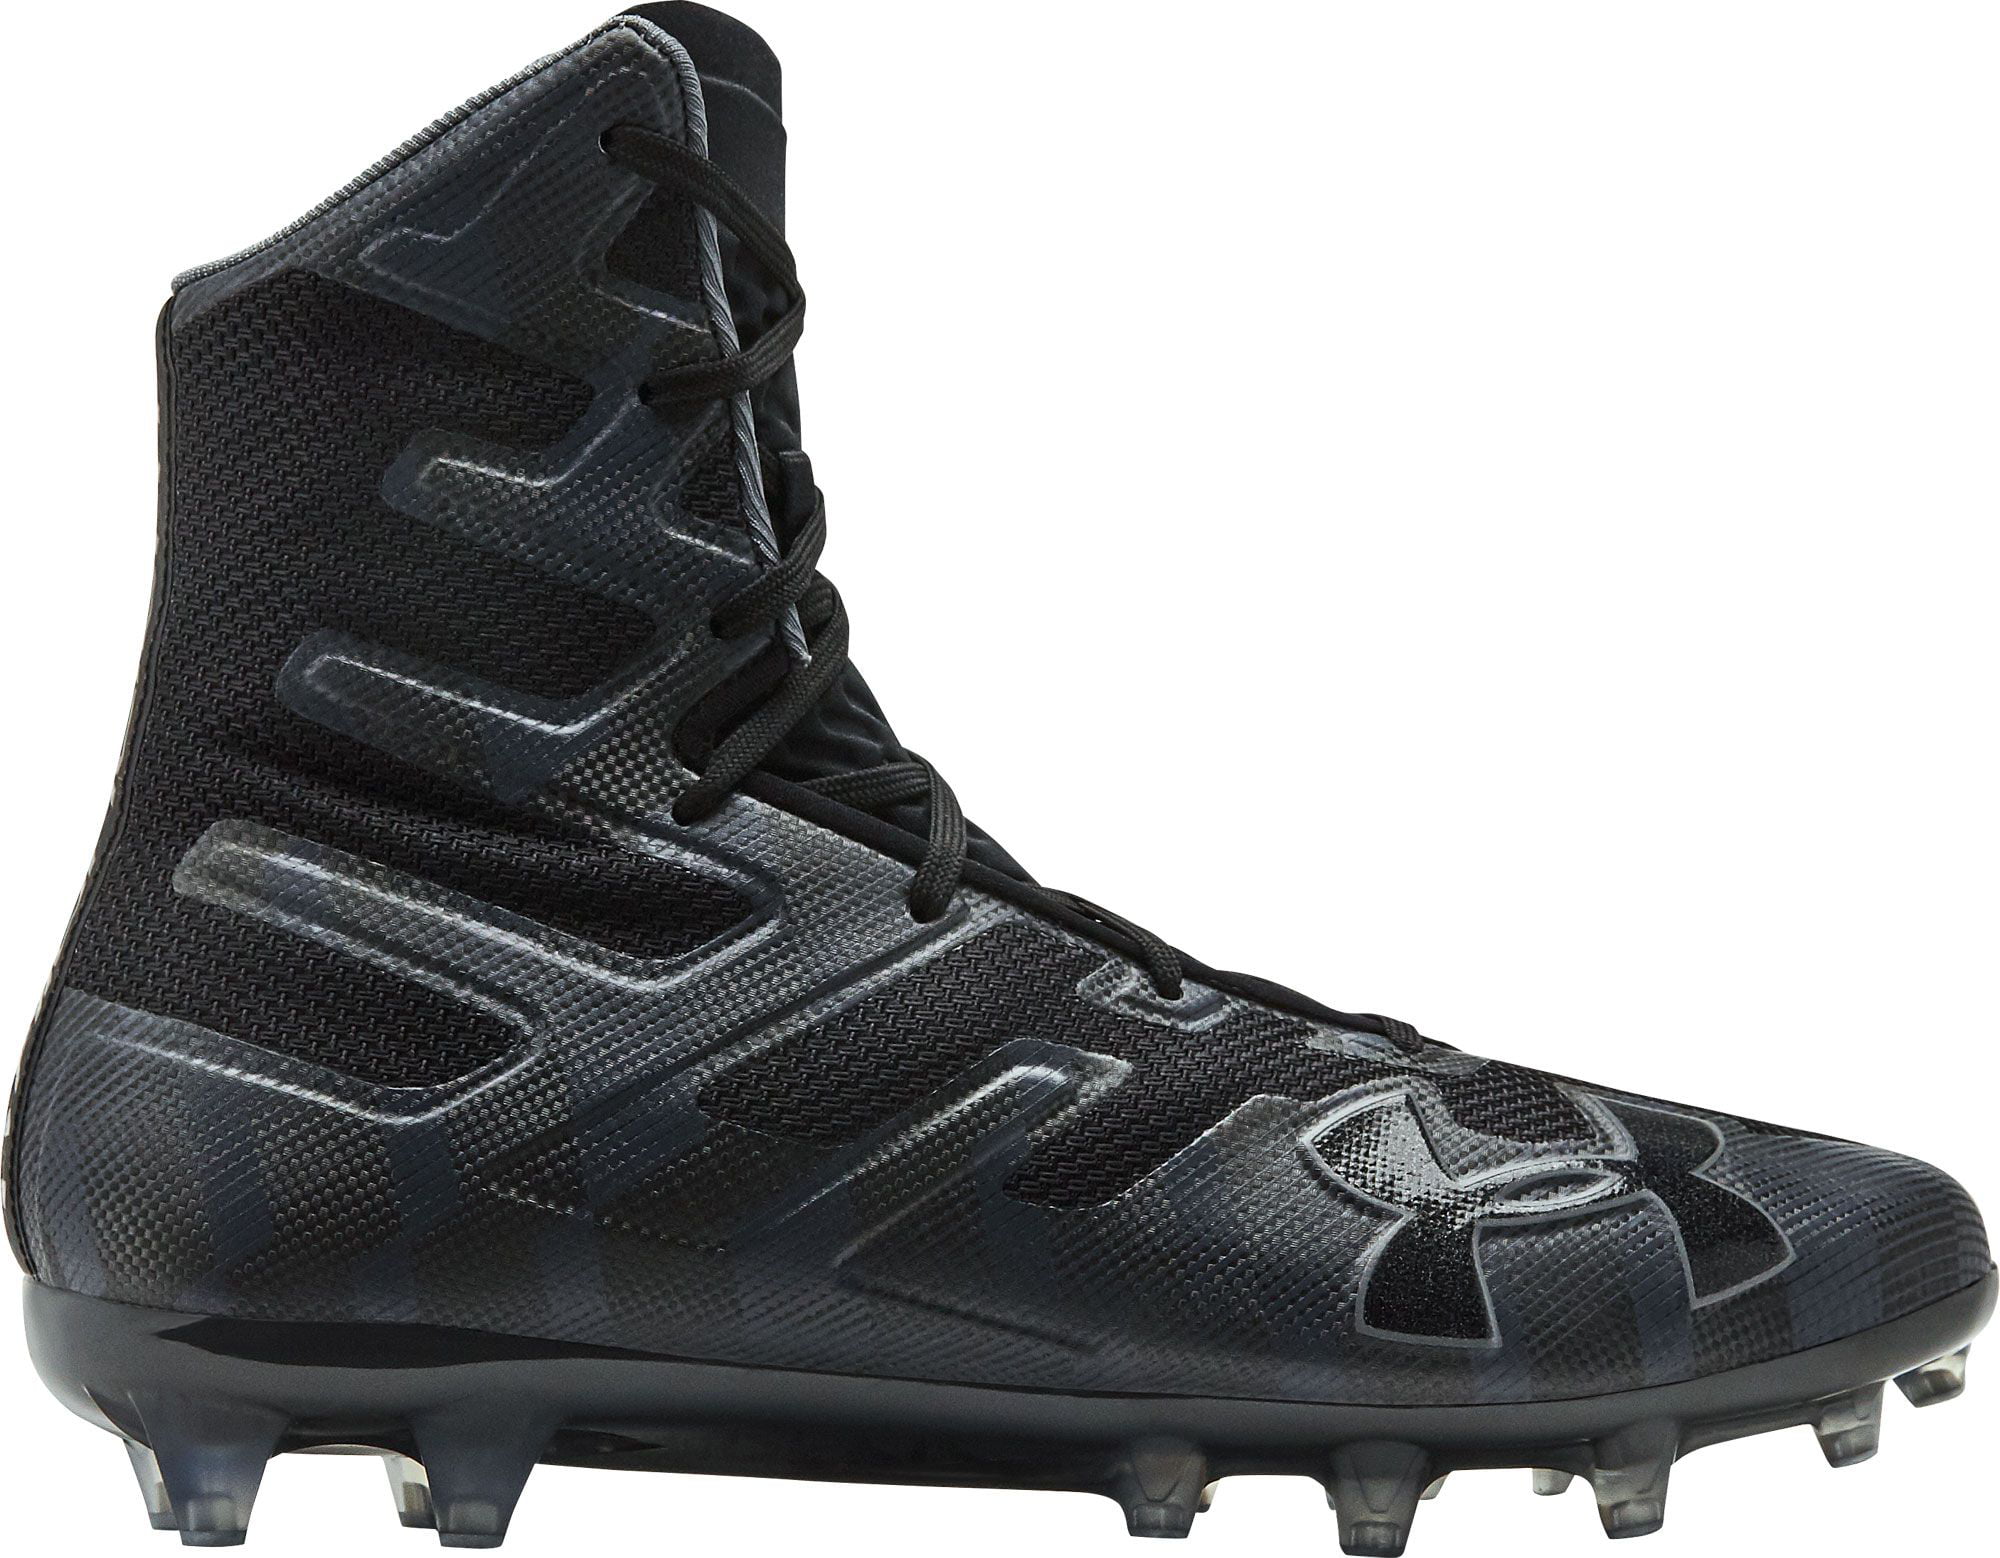 highlight cleats lacrosse